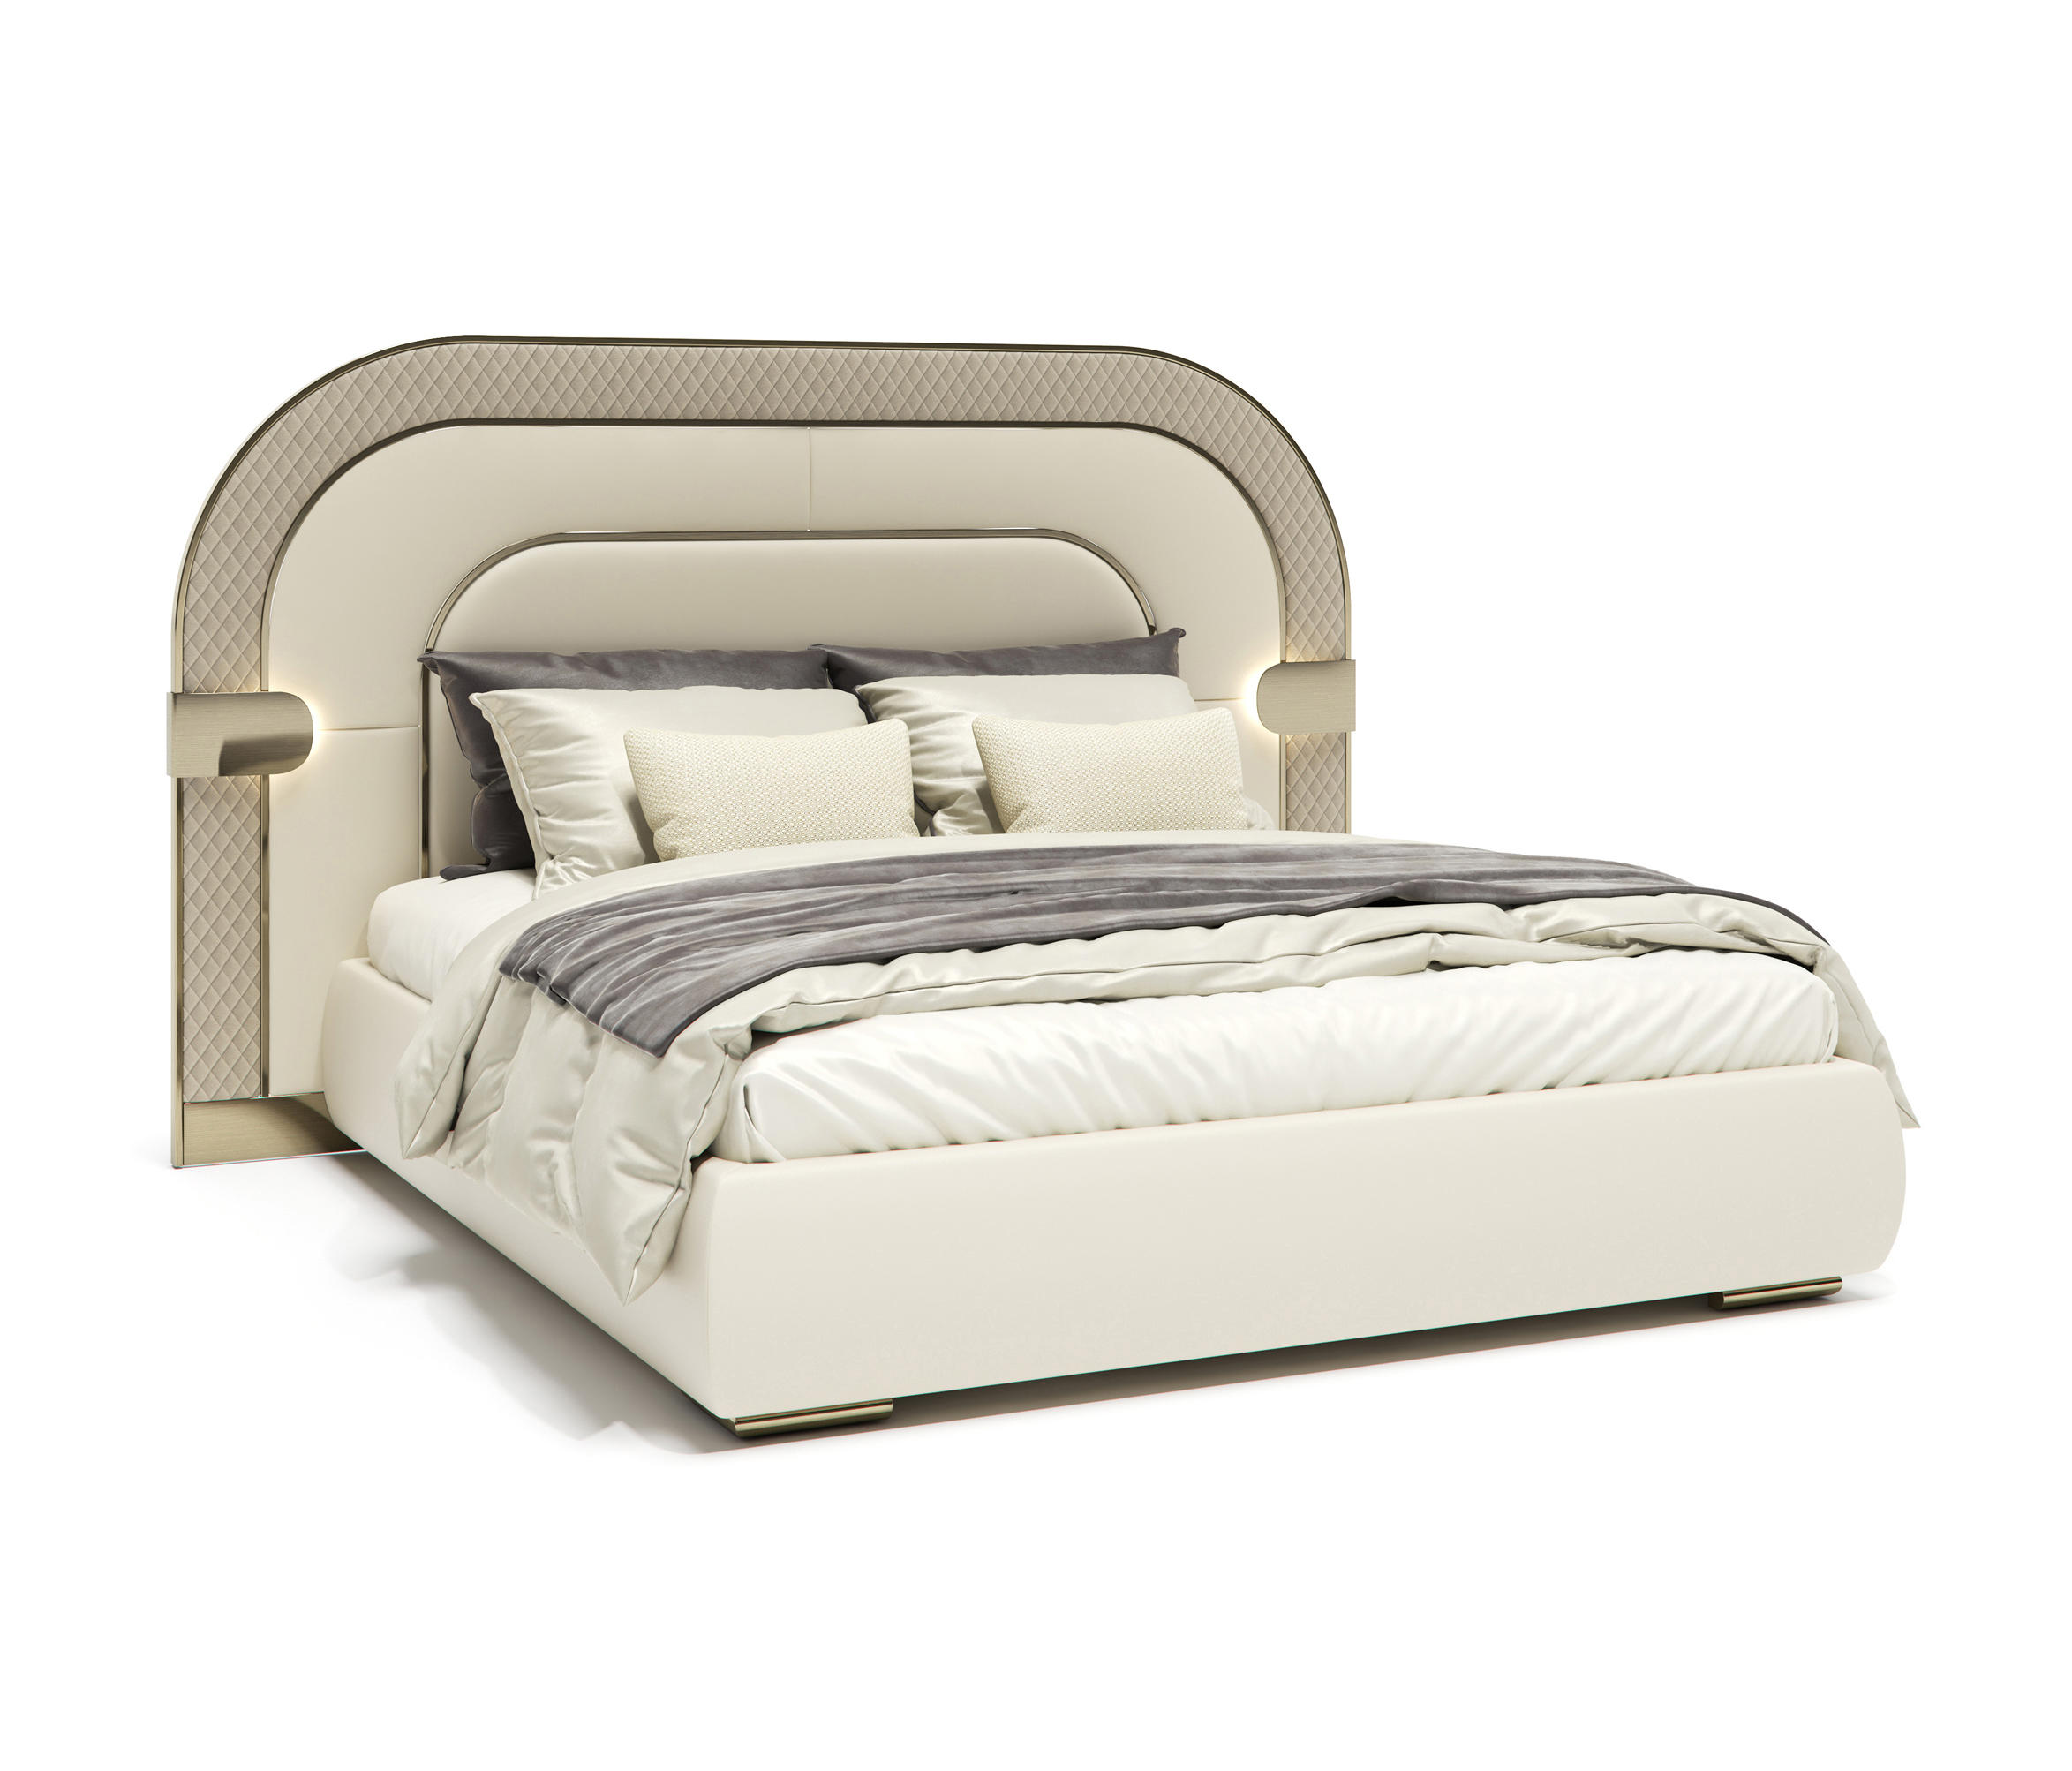 EDEN BED - Beds from Capital | Architonic